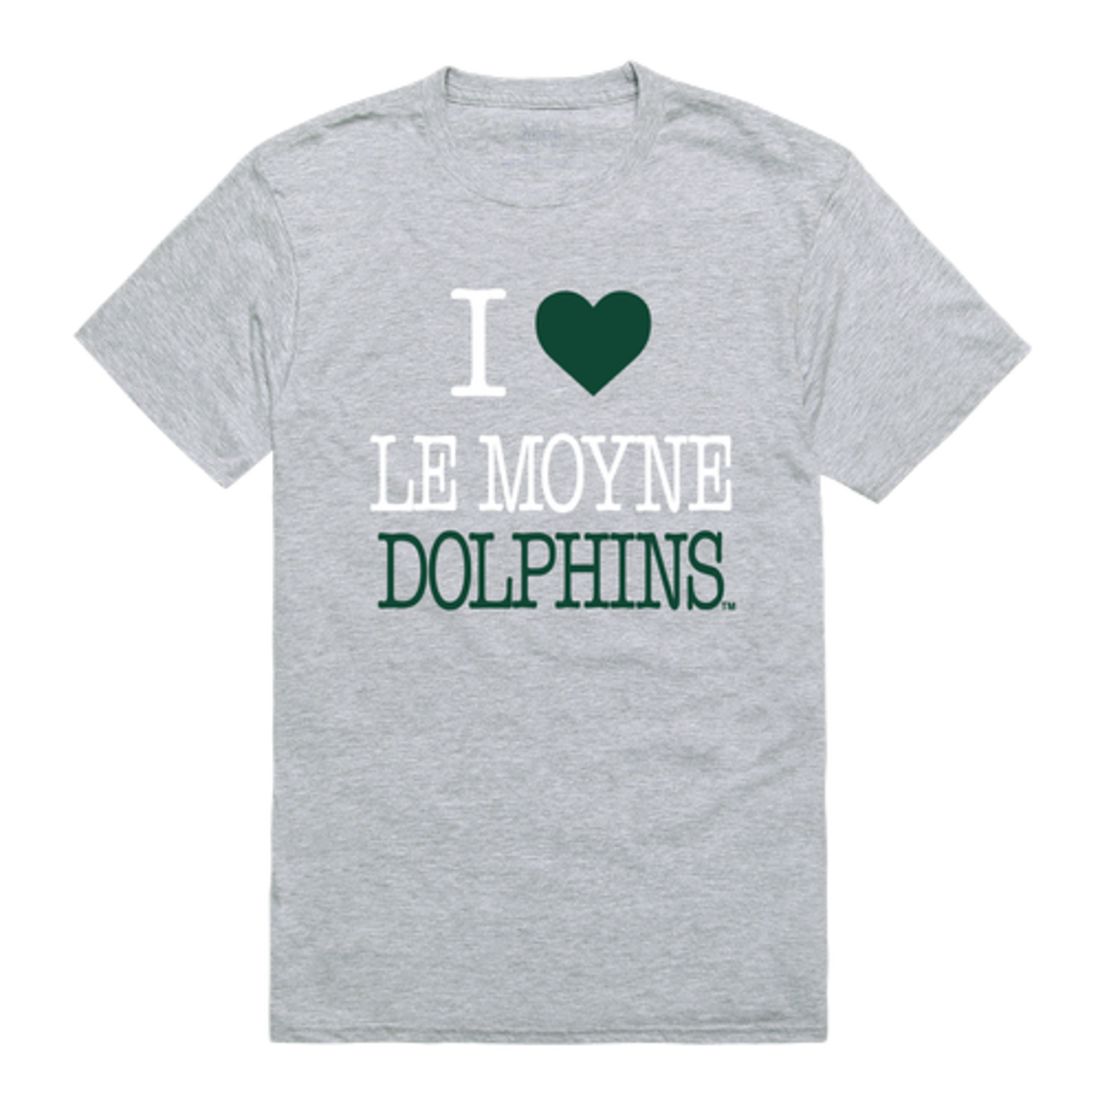 I Love Le Moyne College Dolphins T-Shirt Tee